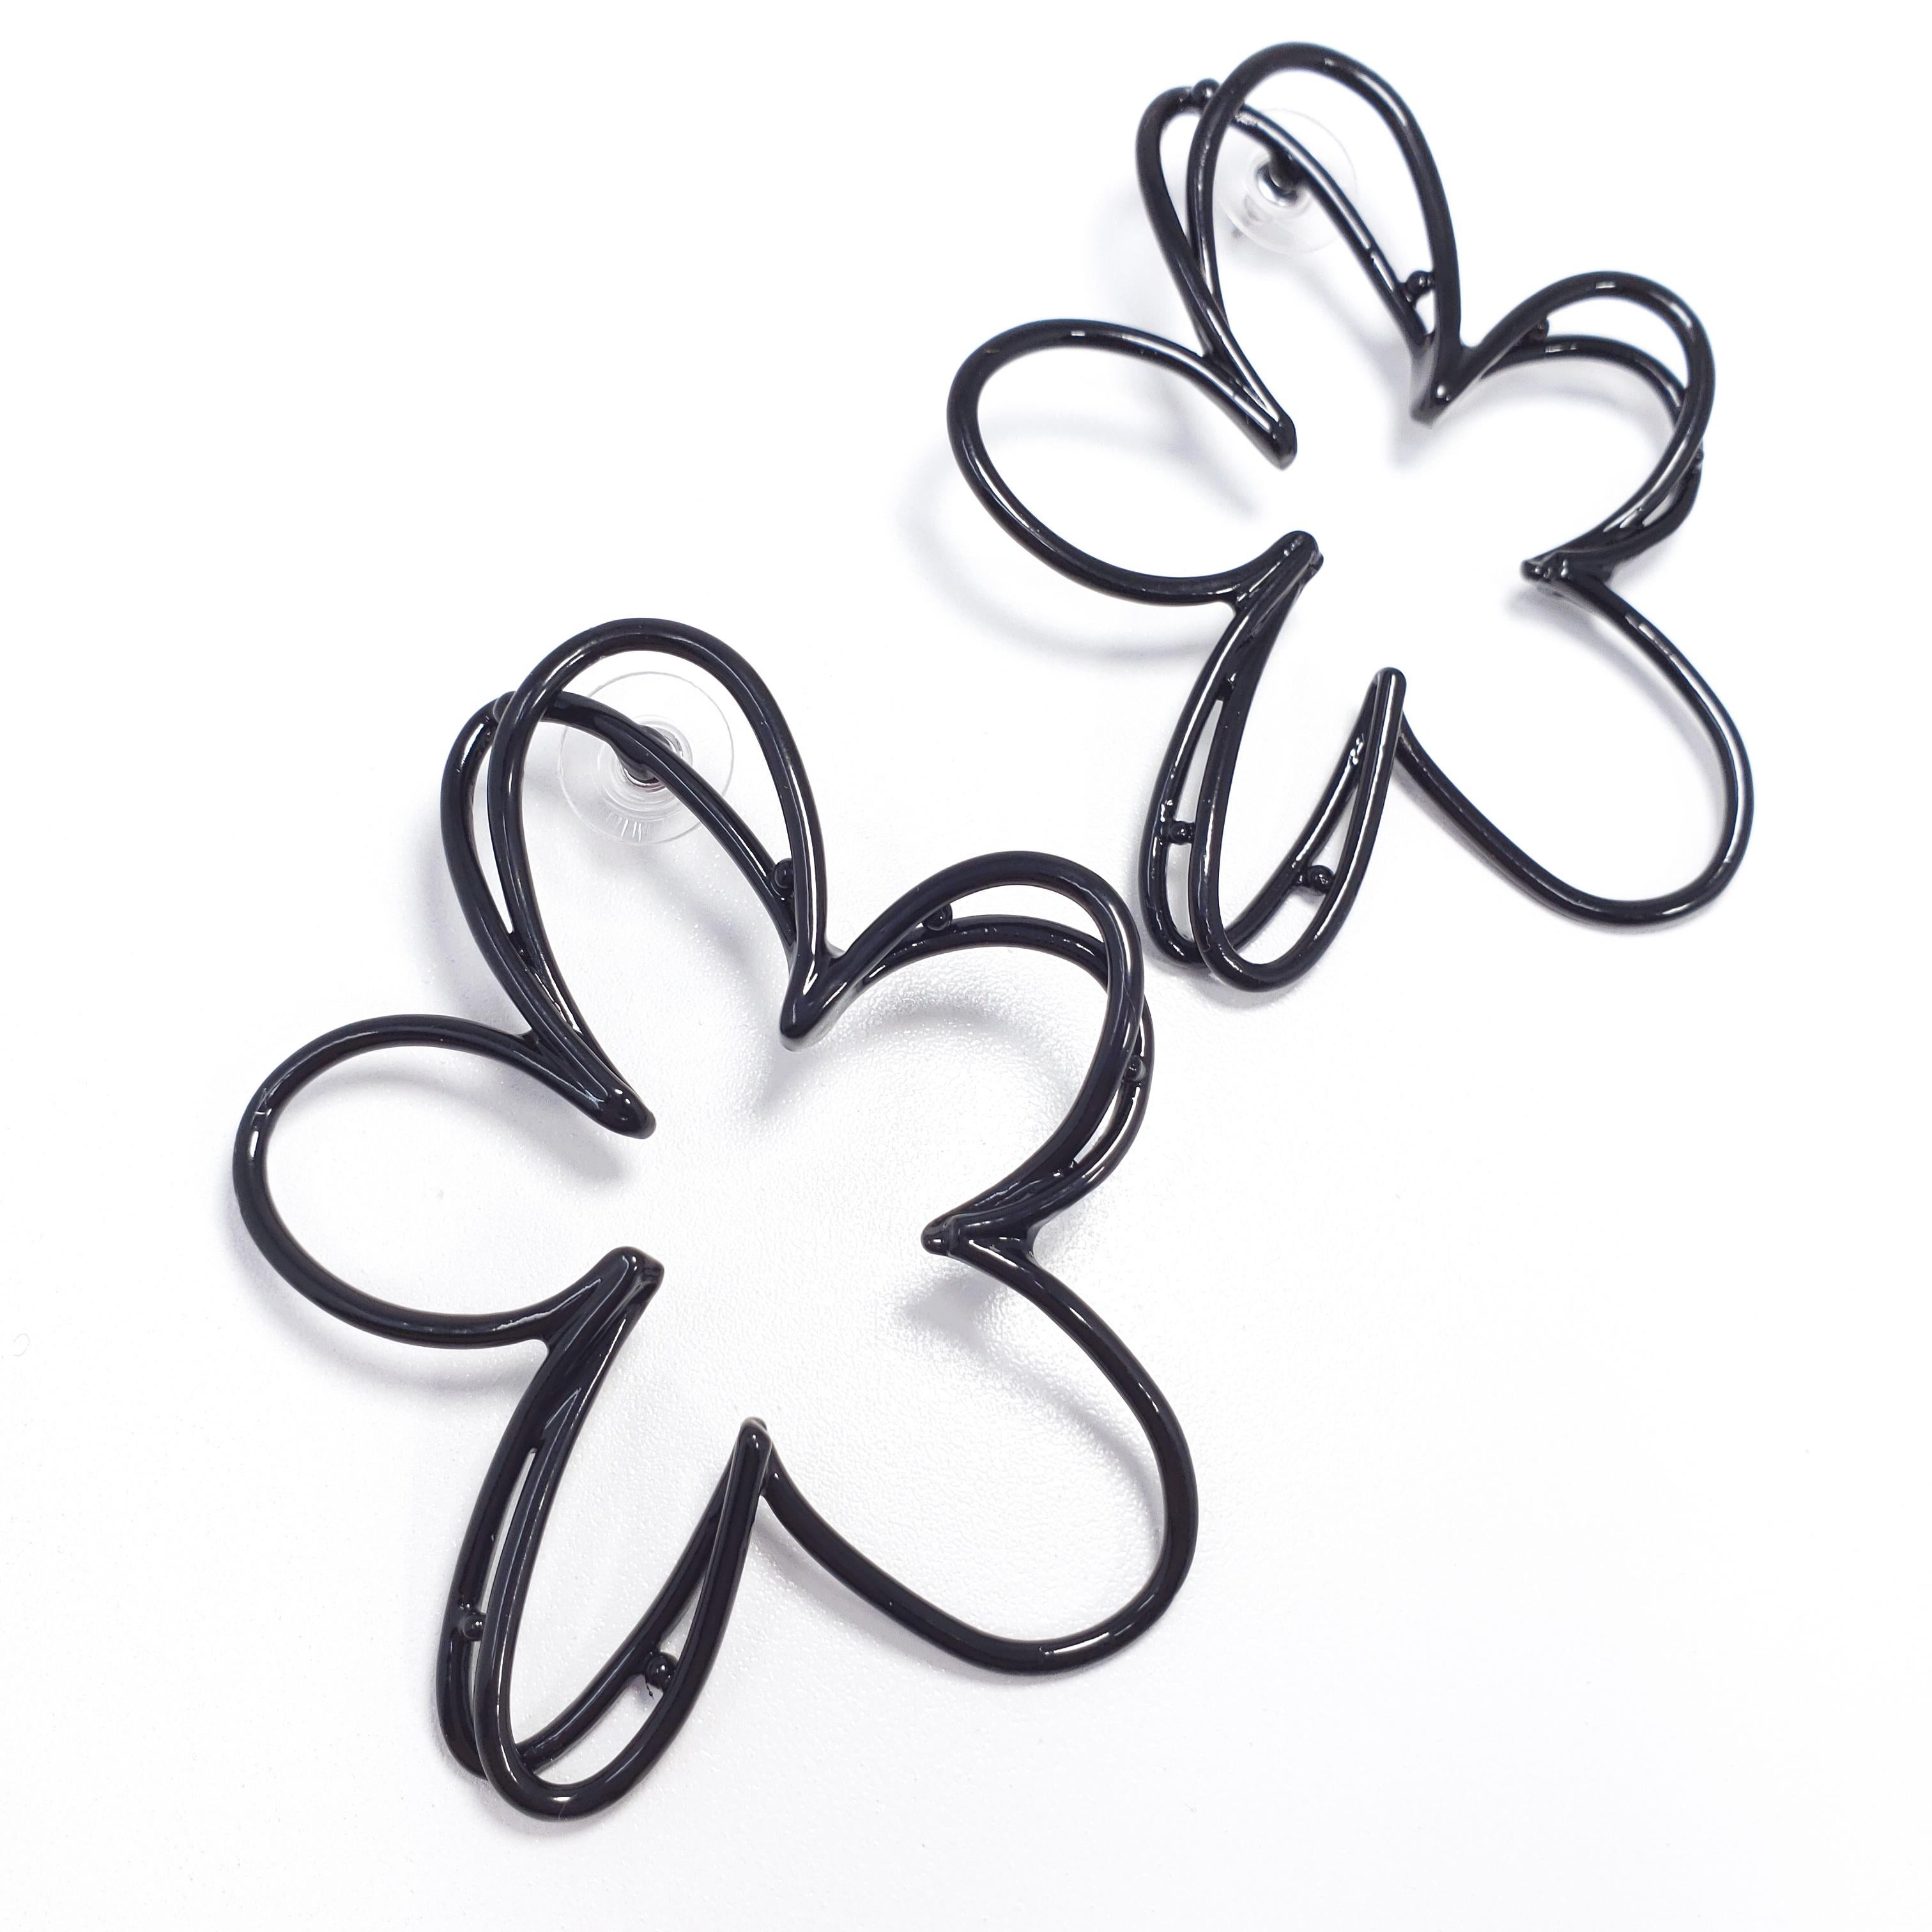 Inspired by Oscar de la Renta's runway prints, these earrings are molded into a gunmetal botanical scribble and coated with black enamel.

• 2.8” x 2.3